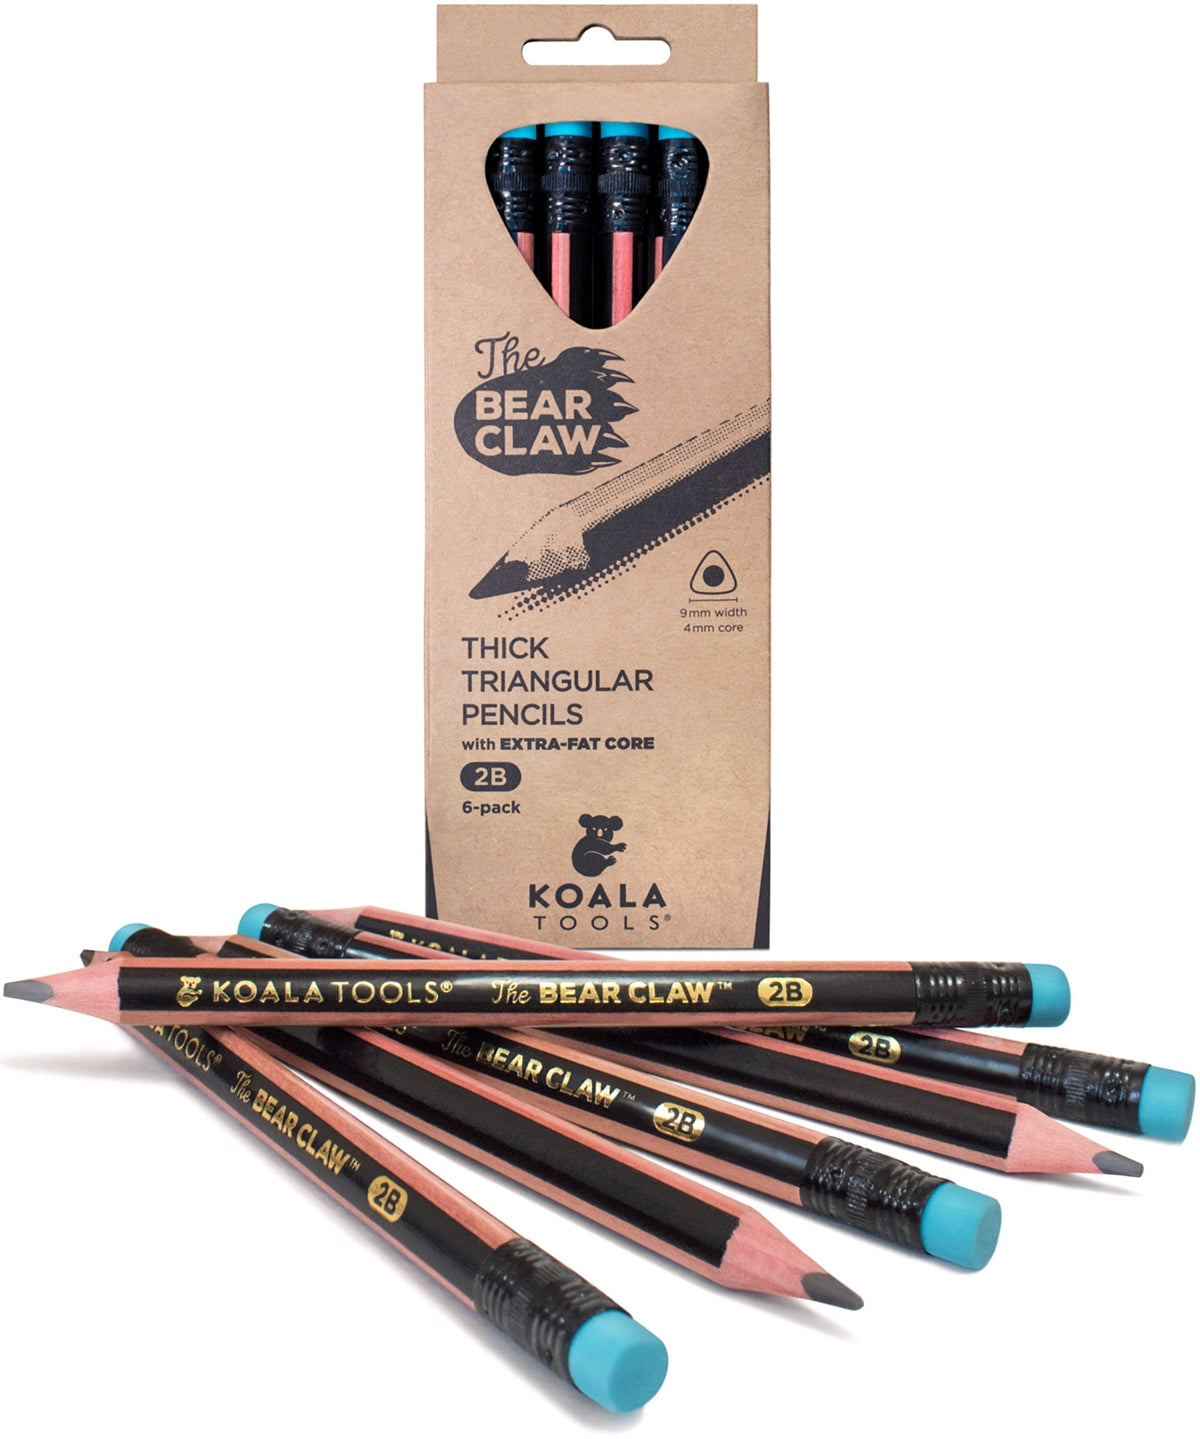 Koala Tools | Bear Claw Pencils (Pack of 6) - Fat, Thick, Strong, Triangular Grip, Graphite, 2B Lead with Eraser - Suitable for